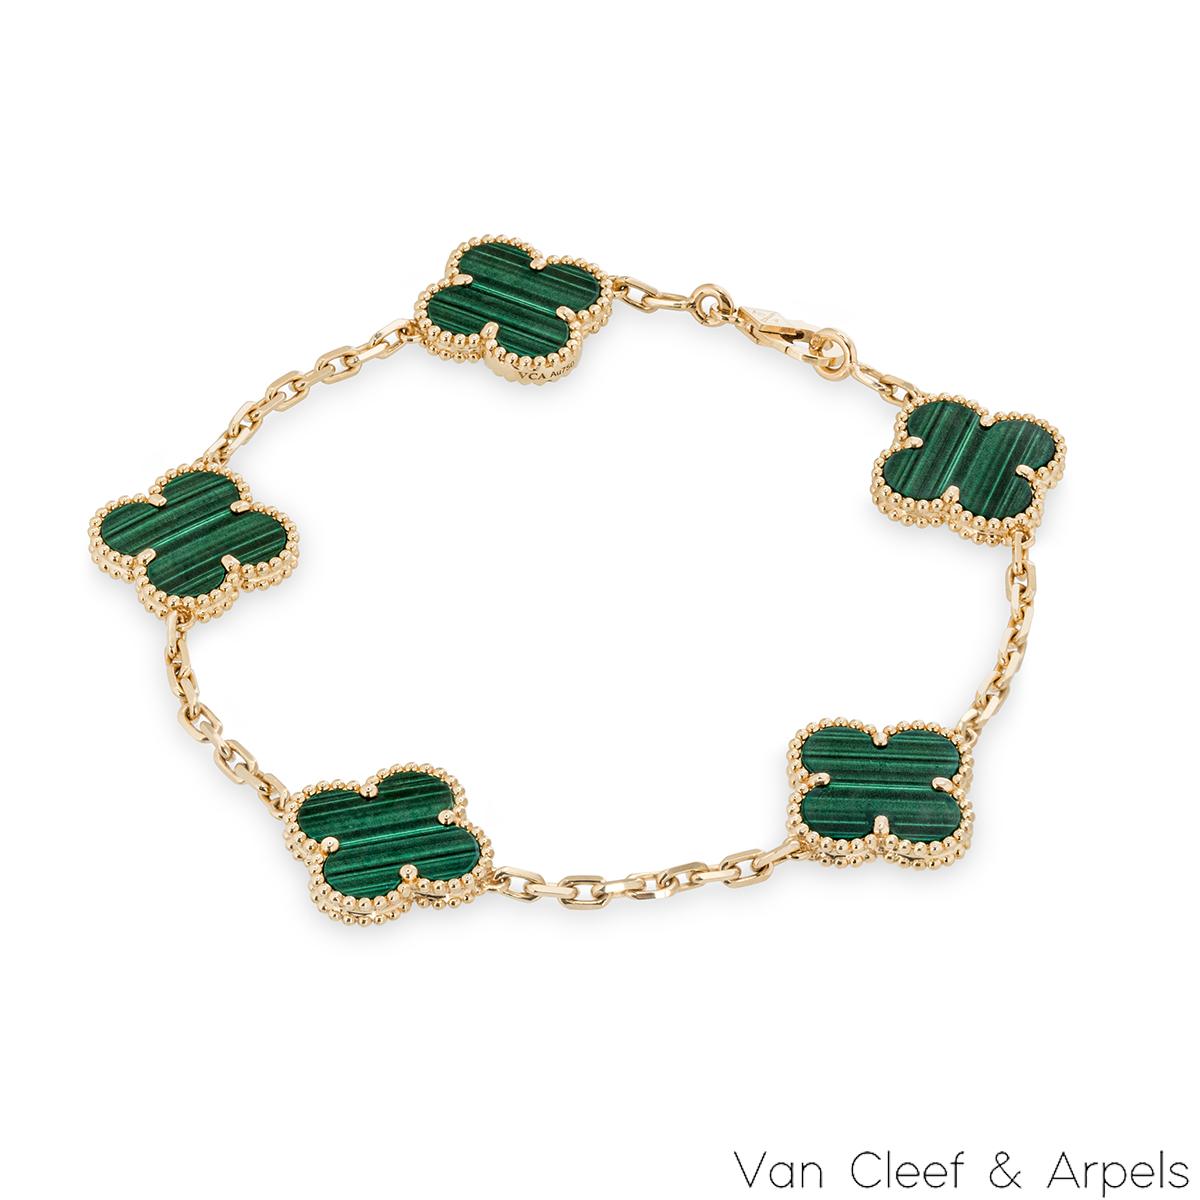 A gorgeous 18k yellow gold malachite bracelet by Van Cleef & Arpels from the Vintage Alhambra collection. The bracelet features 5 iconic 4 leaf clover motifs, each set with a beaded edge and a malachite inlay, set throughout the length of the chain.